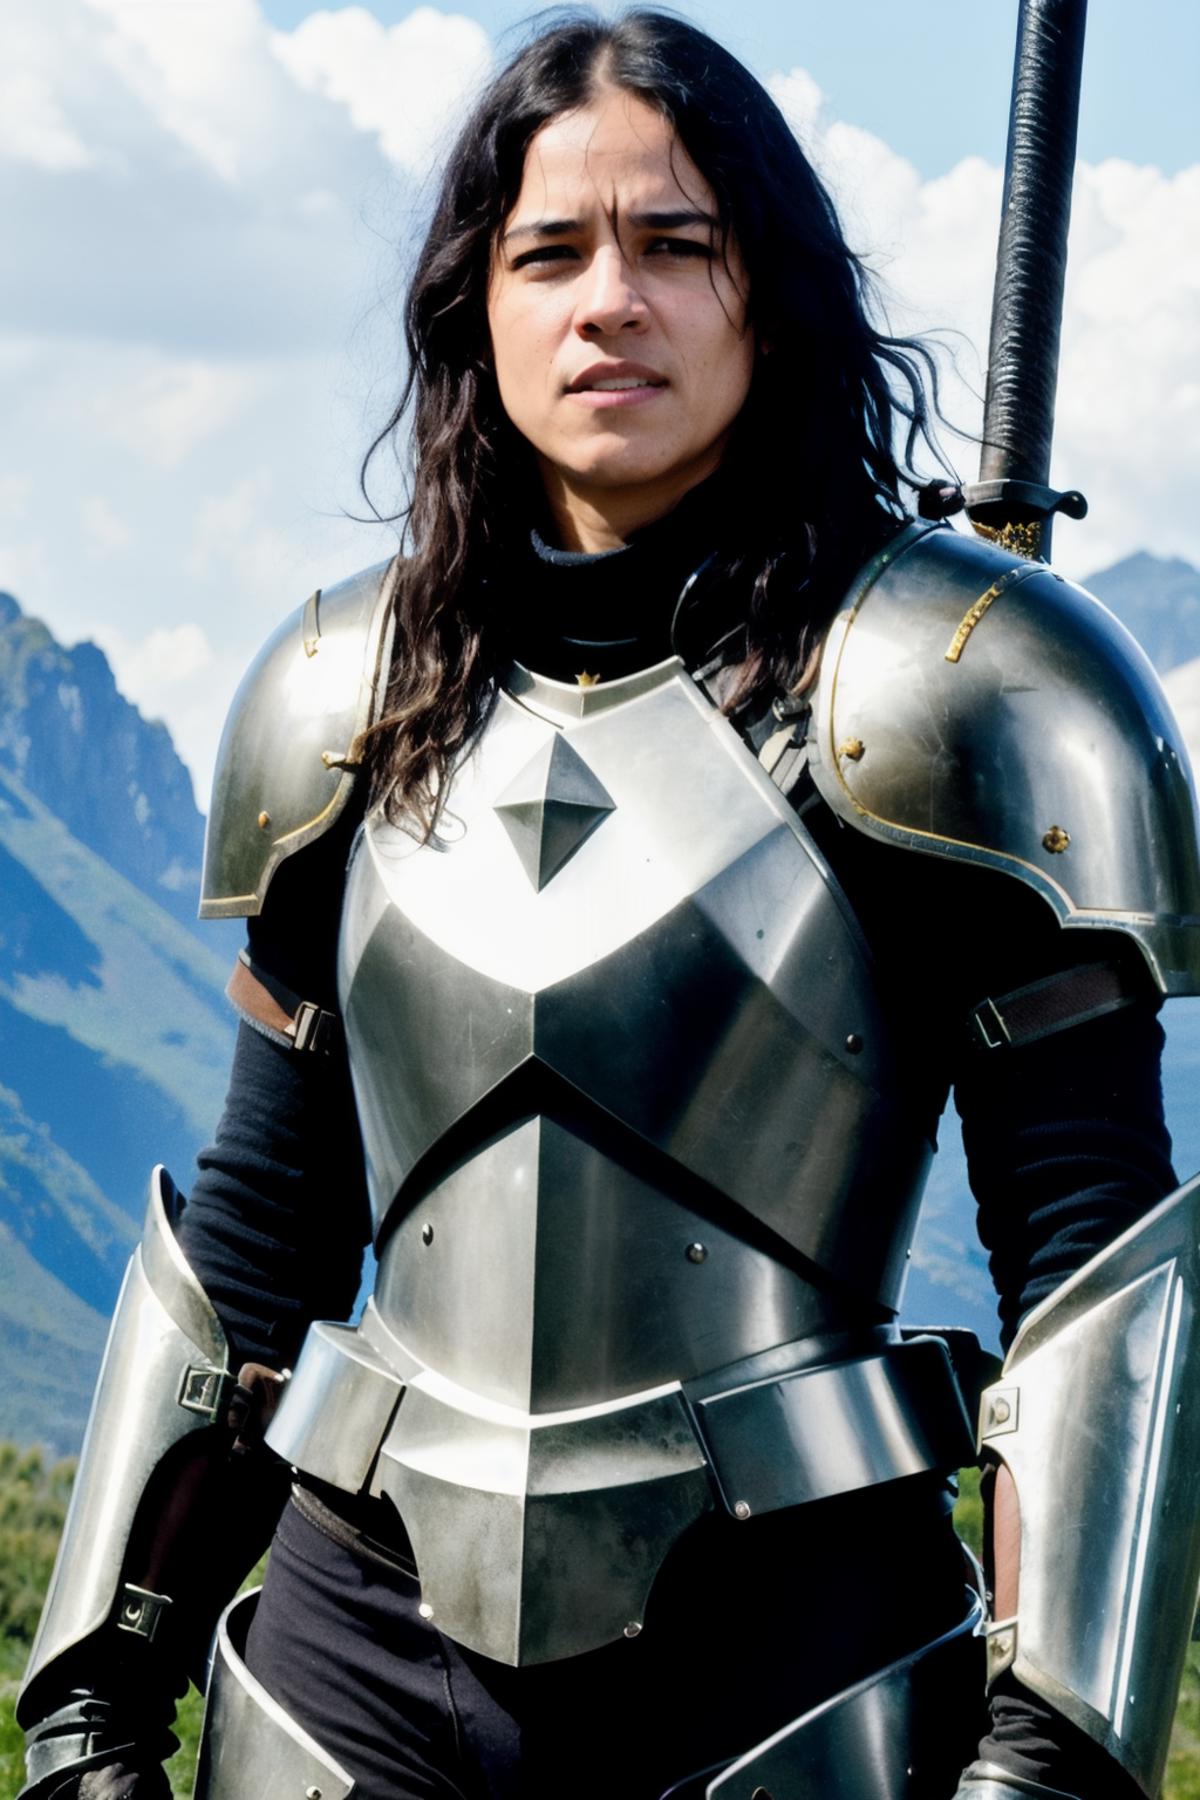 Michelle Rodriguez image by frankyfrank2k